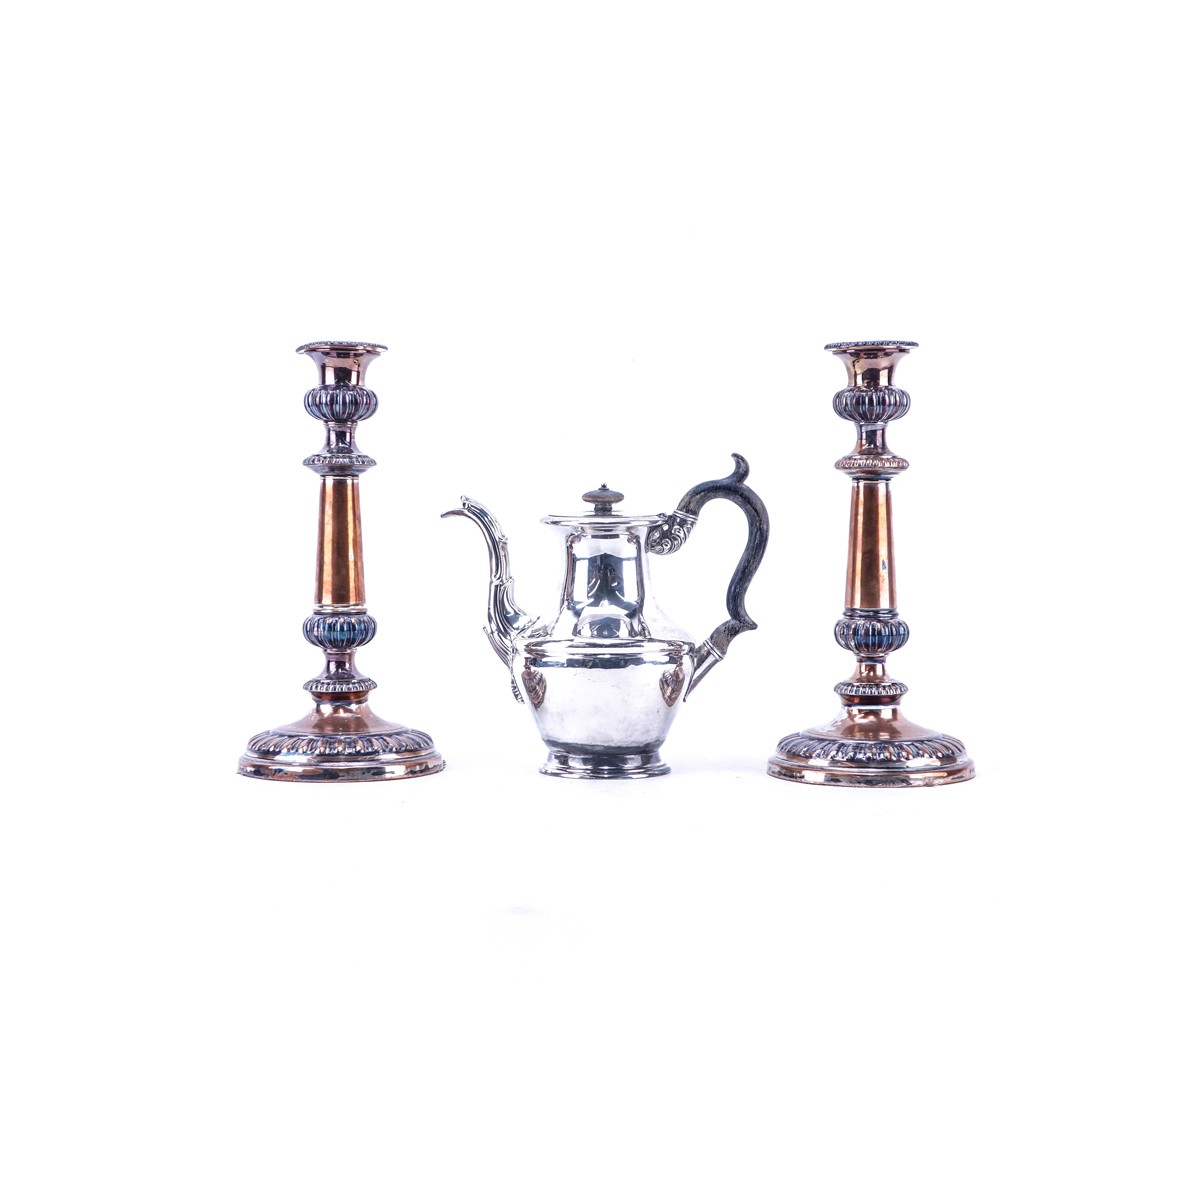 Grouping of Three (3): Pair of Silverplate Candlesticks, James Dixon & Sons Silverplate Teapot. Can